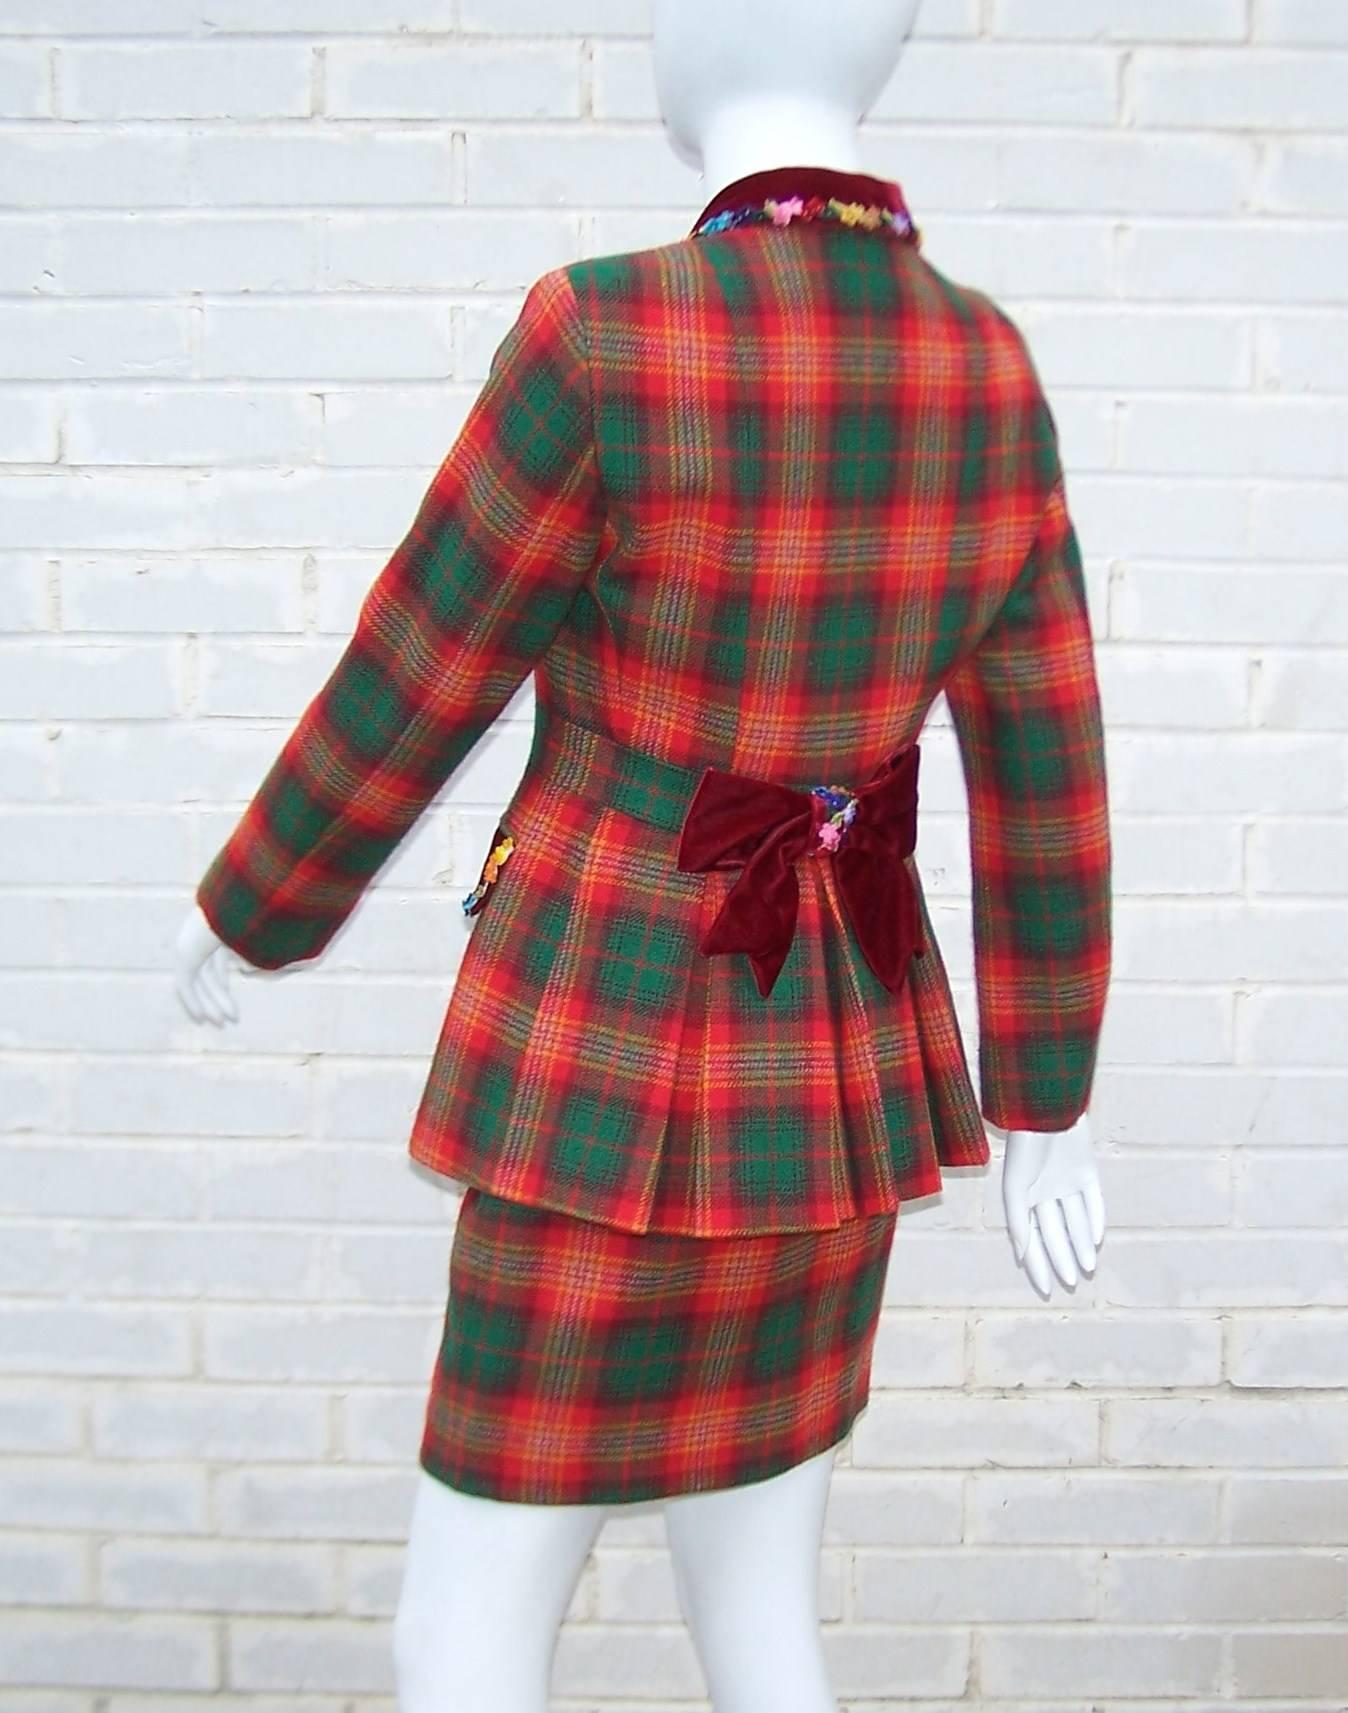 Women's Adorable 1990's Moschino Plaid Skirt Suit With Velvet Heart Buttons